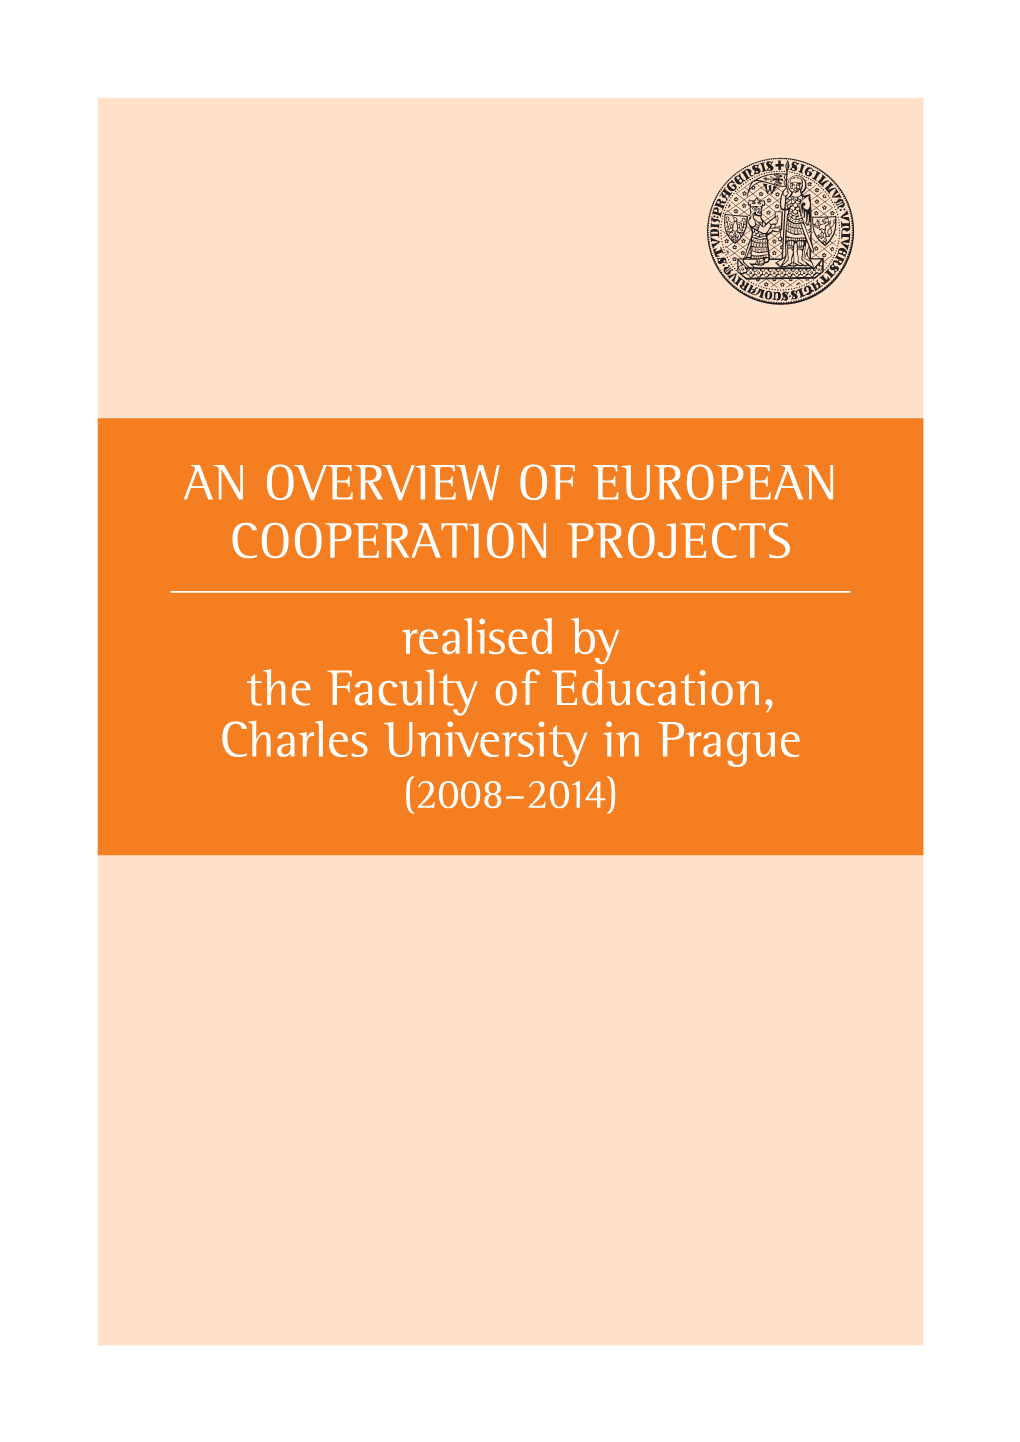 An Overview of European Cooperation Projects